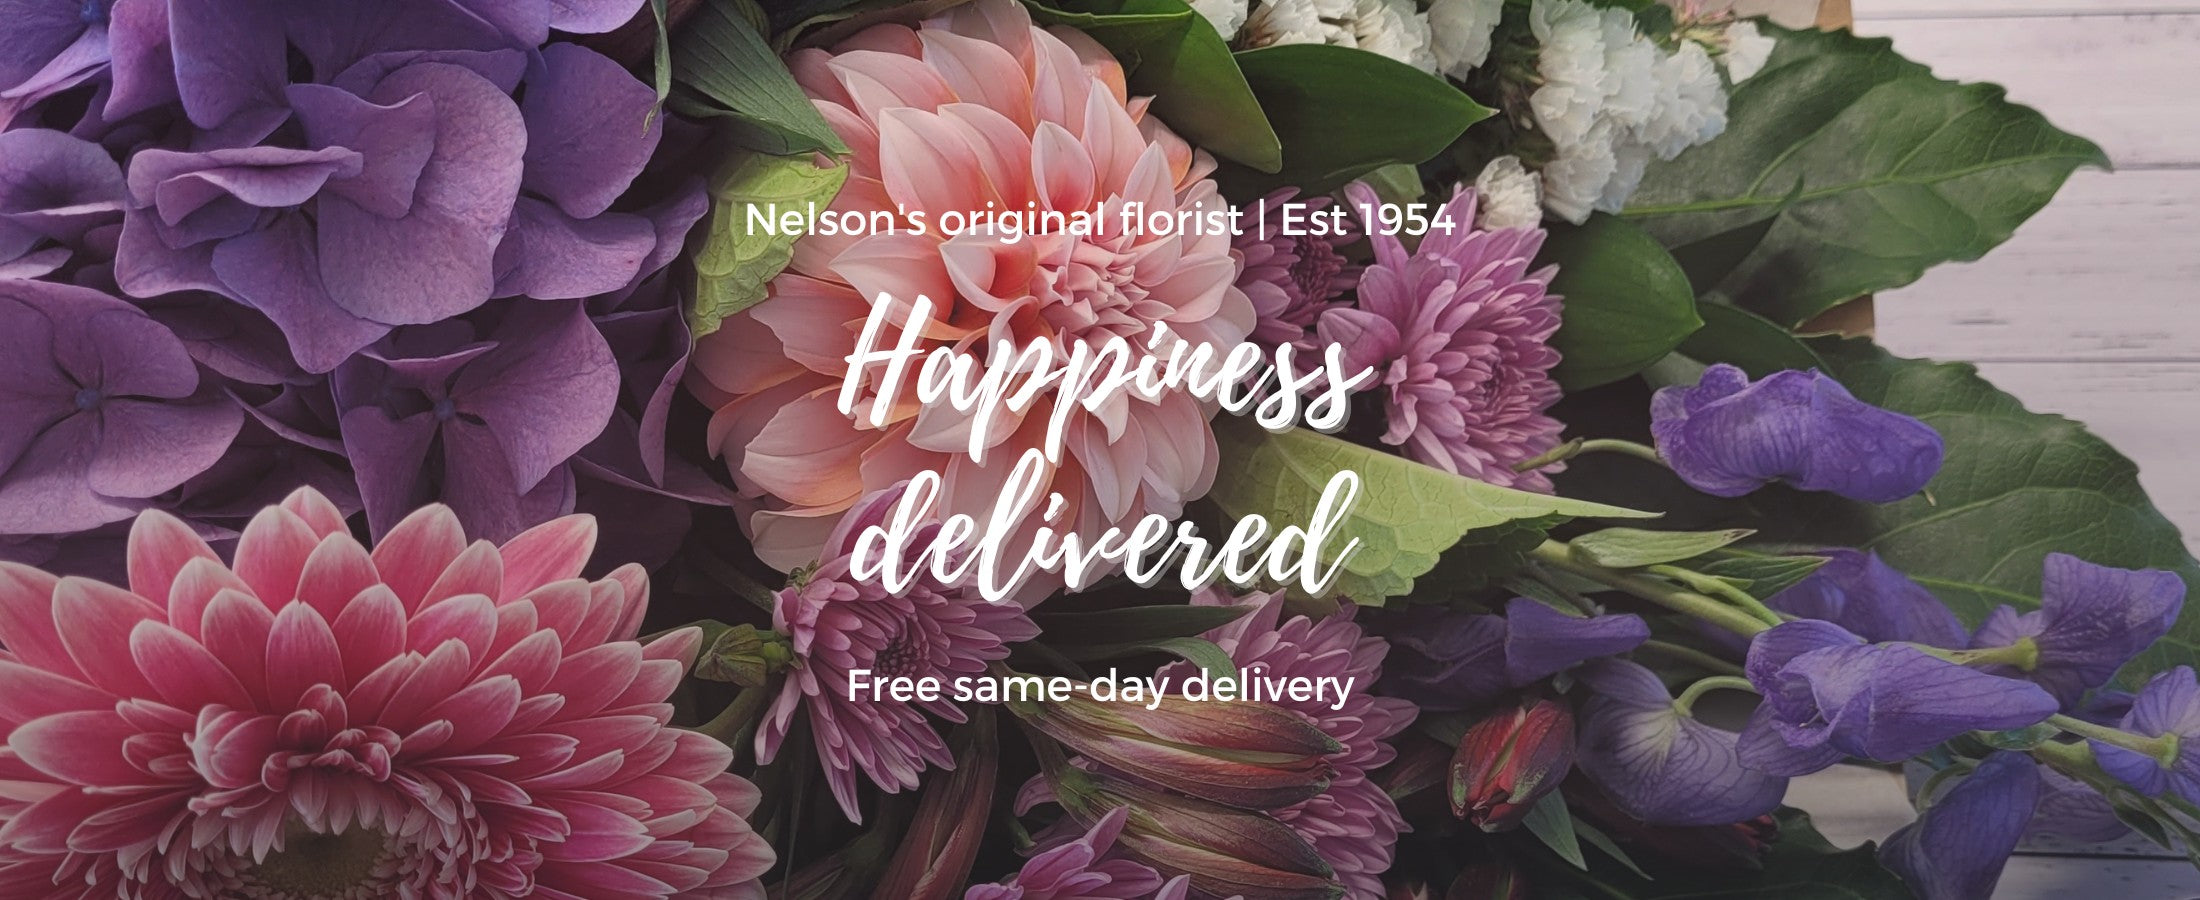 Nelson Flower Delivery